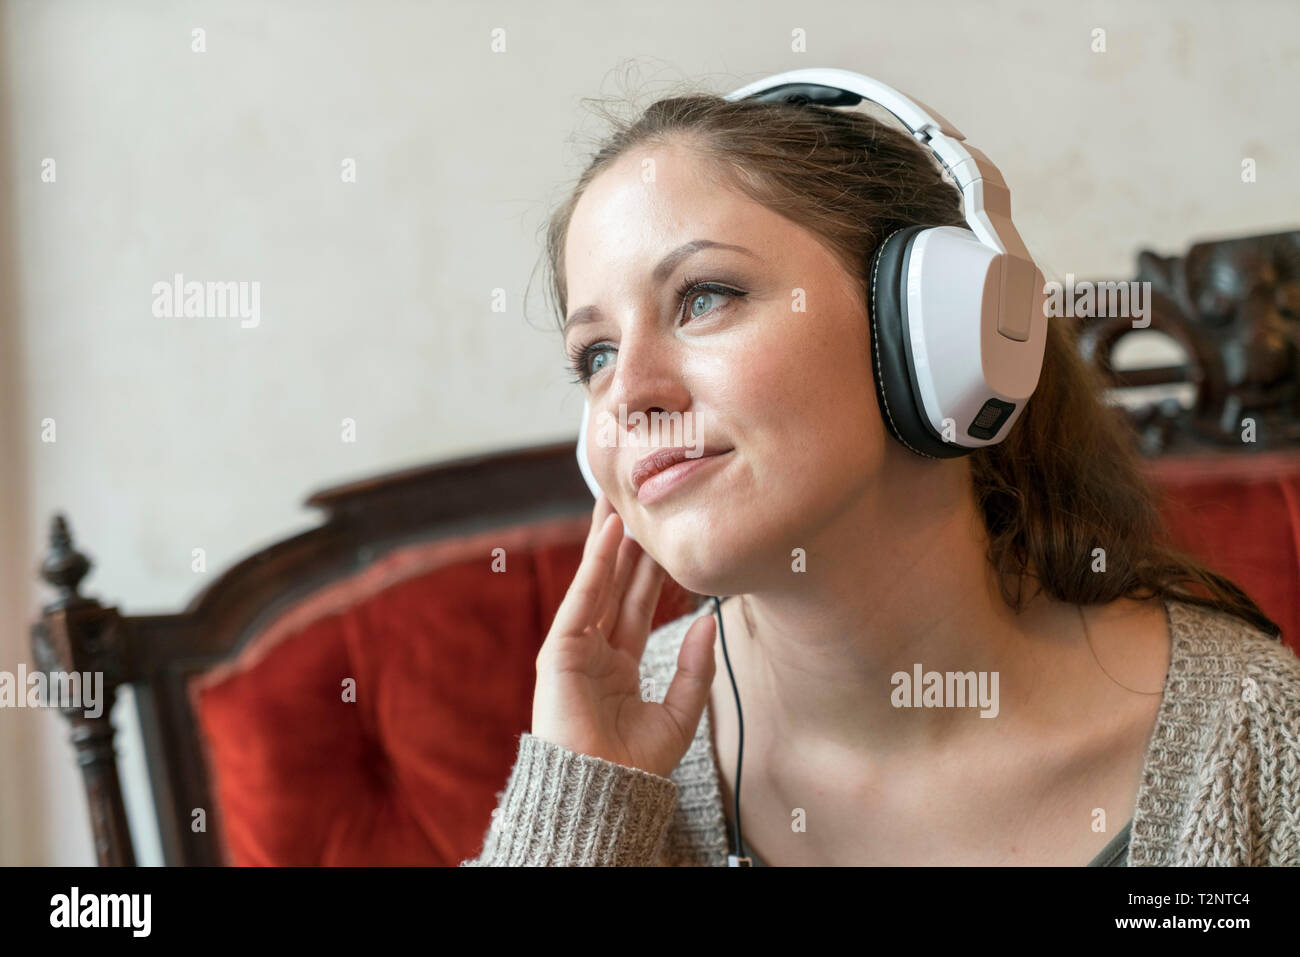 Young woman listening to music with headphones at home Stock Photo